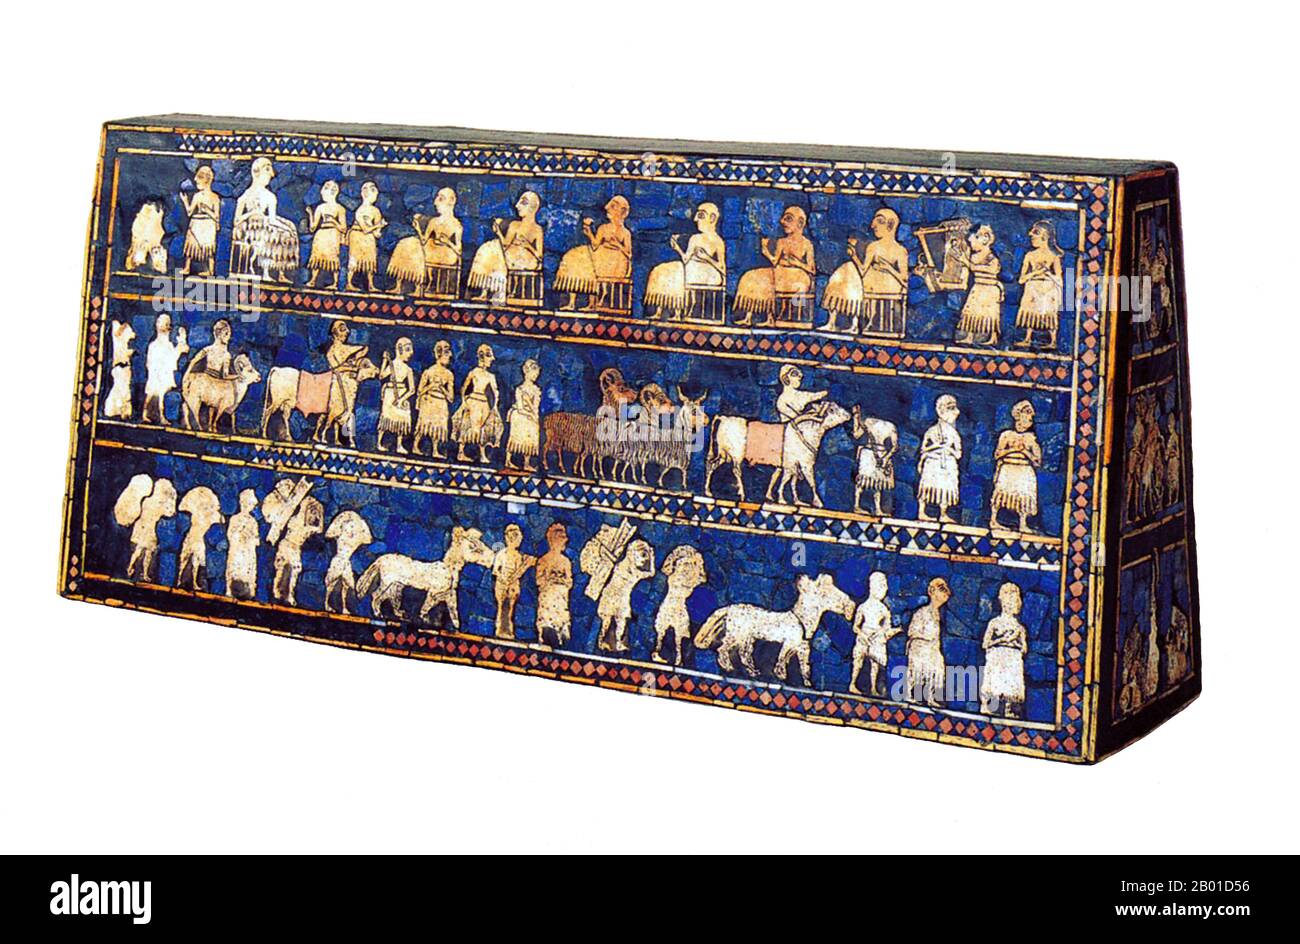 Iraq: The peace side of the Standard of Ur (also known as the 'Battle Standard of Ur', or the 'Royal Standard of Ur'), a Sumerian artifact excavated from the Royal Cemetery in the ancient city of Ur, located in modern-day Iraq to the south of Baghdad, c. 2600 BCE.  The Standard of Ur survived in only a fragmentary condition, as the effects of time over the last several millennia had decayed the wooden frame and bitumen glue which had cemented the mosaic in place. The weight of the soil had crushed the object, fragmenting it and breaking the end panels. Stock Photo